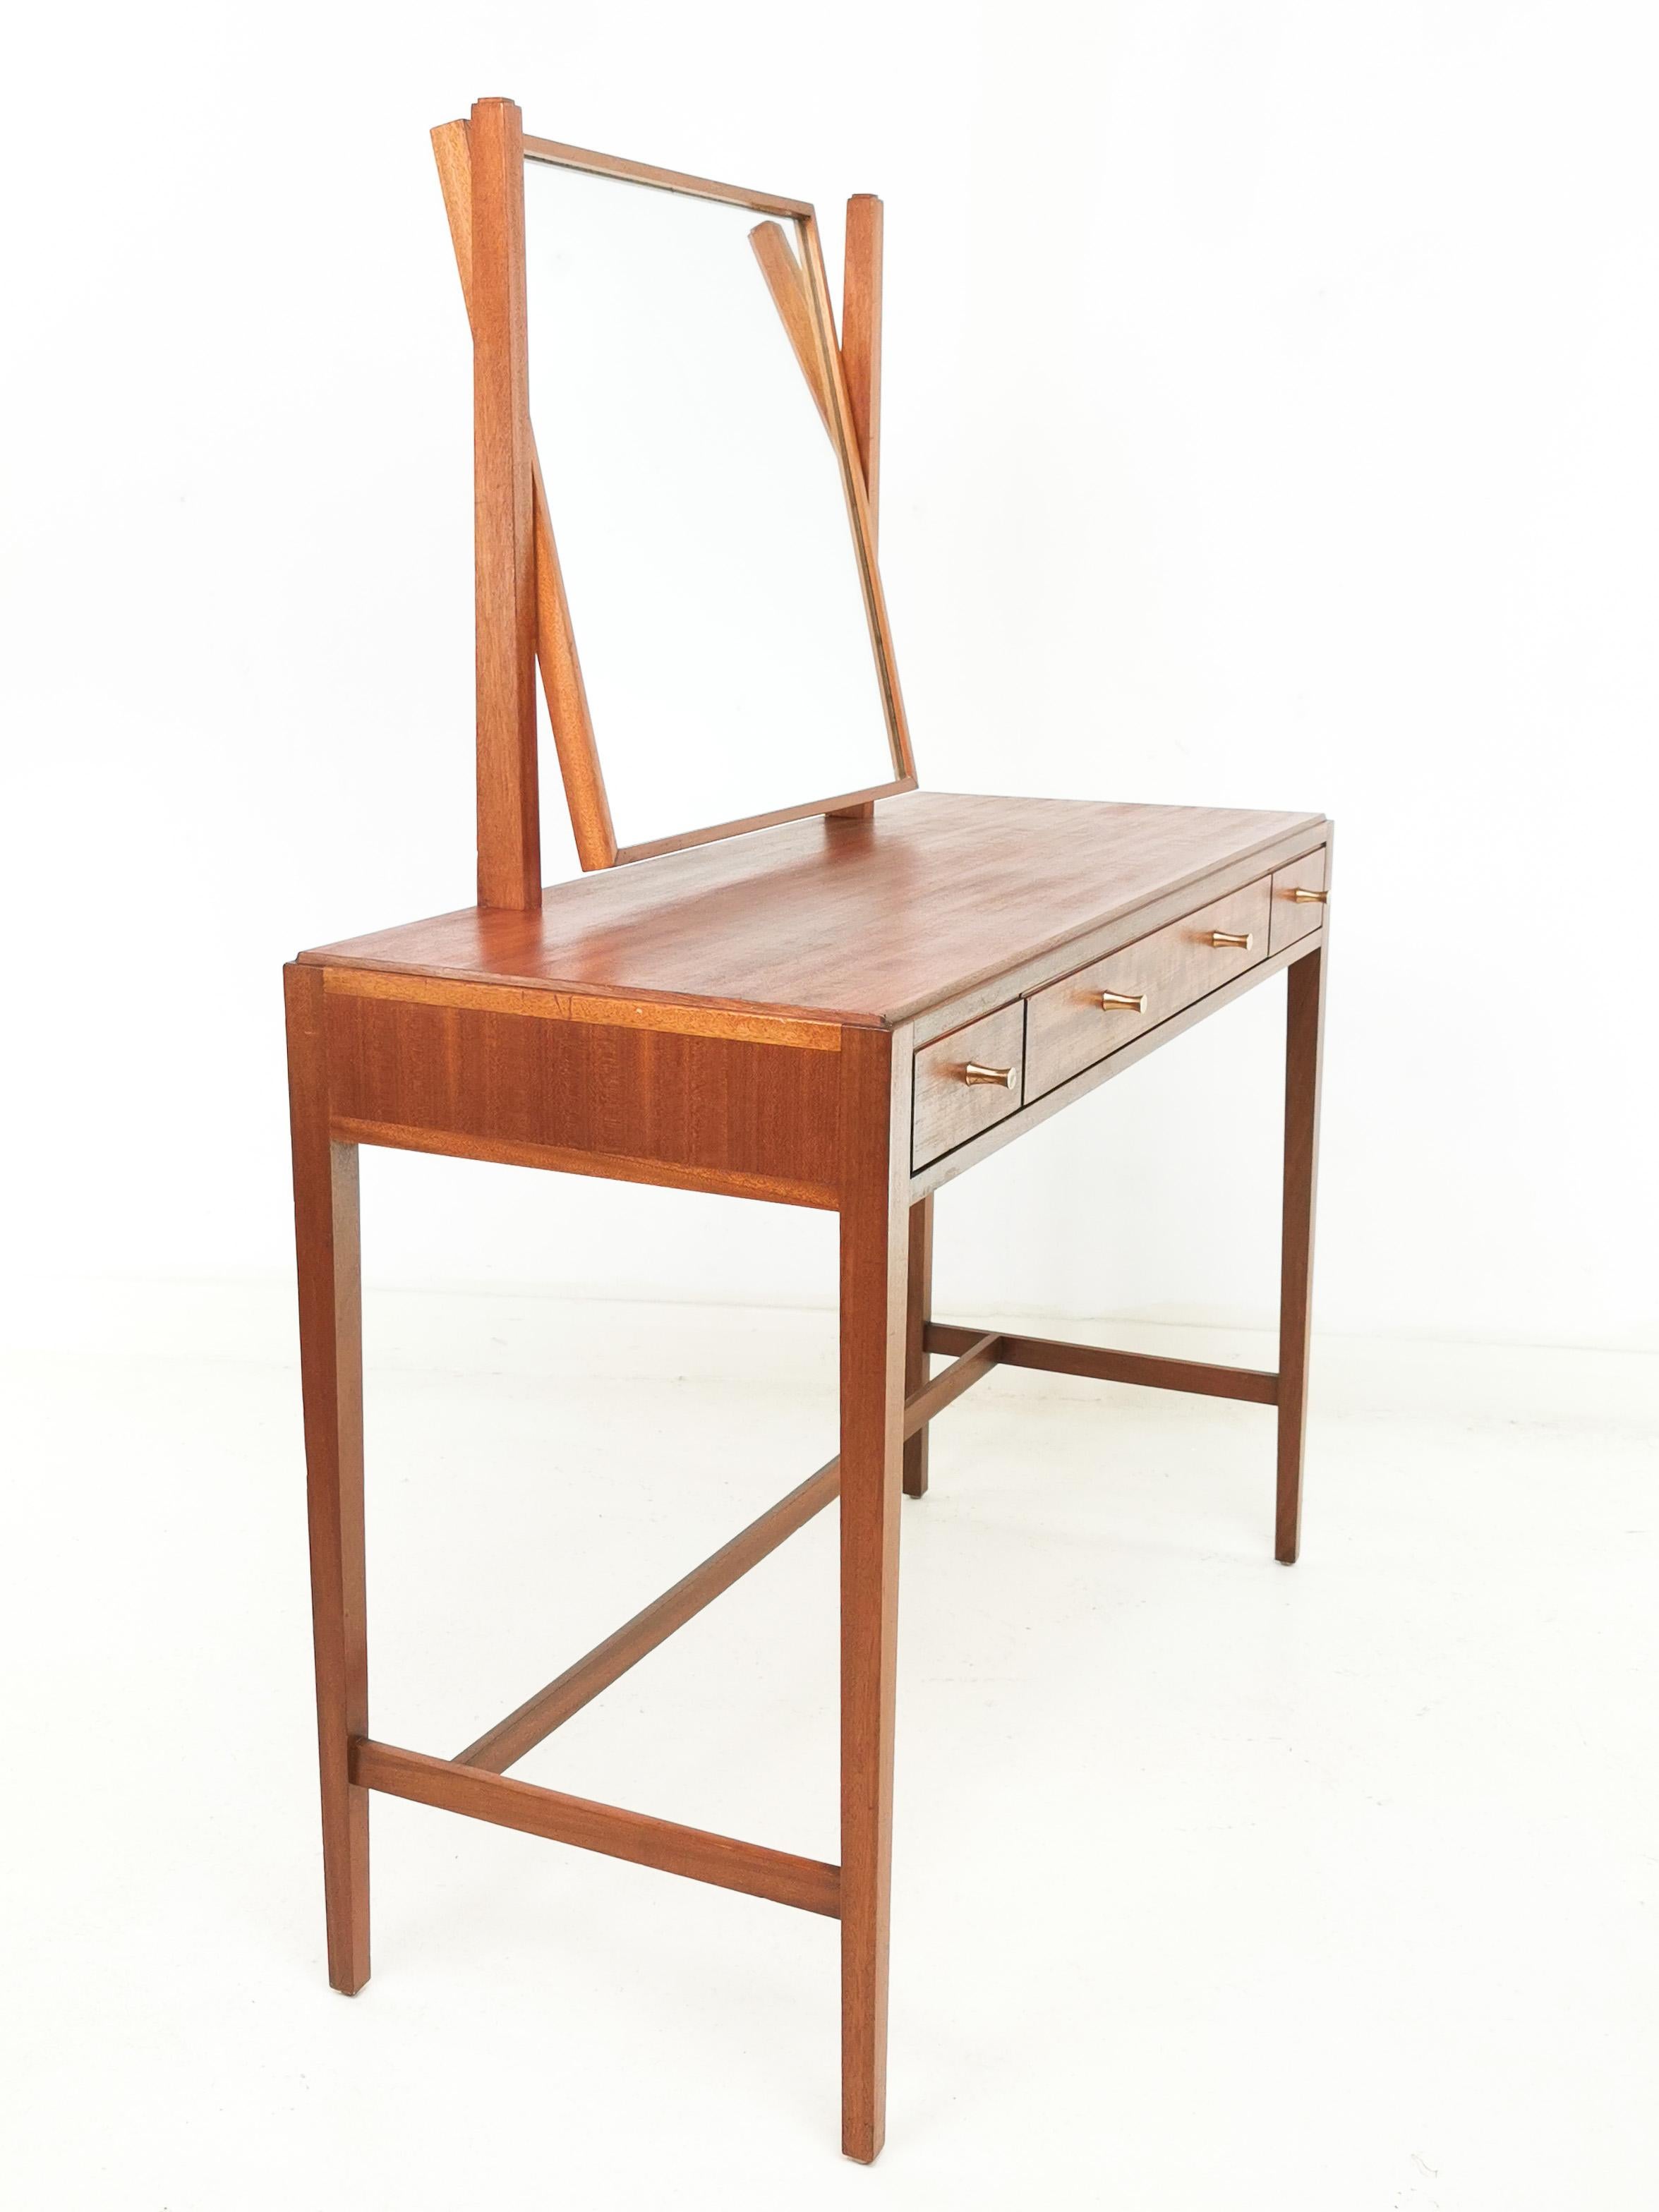 Loughborough dressing table

Teak dressing table manufactured by high quality furniture manufacturer Loughborough and made for Heals London.

Three drawers with brass handle pulls. Drawers are dovetailed, solid and run as exactly as they